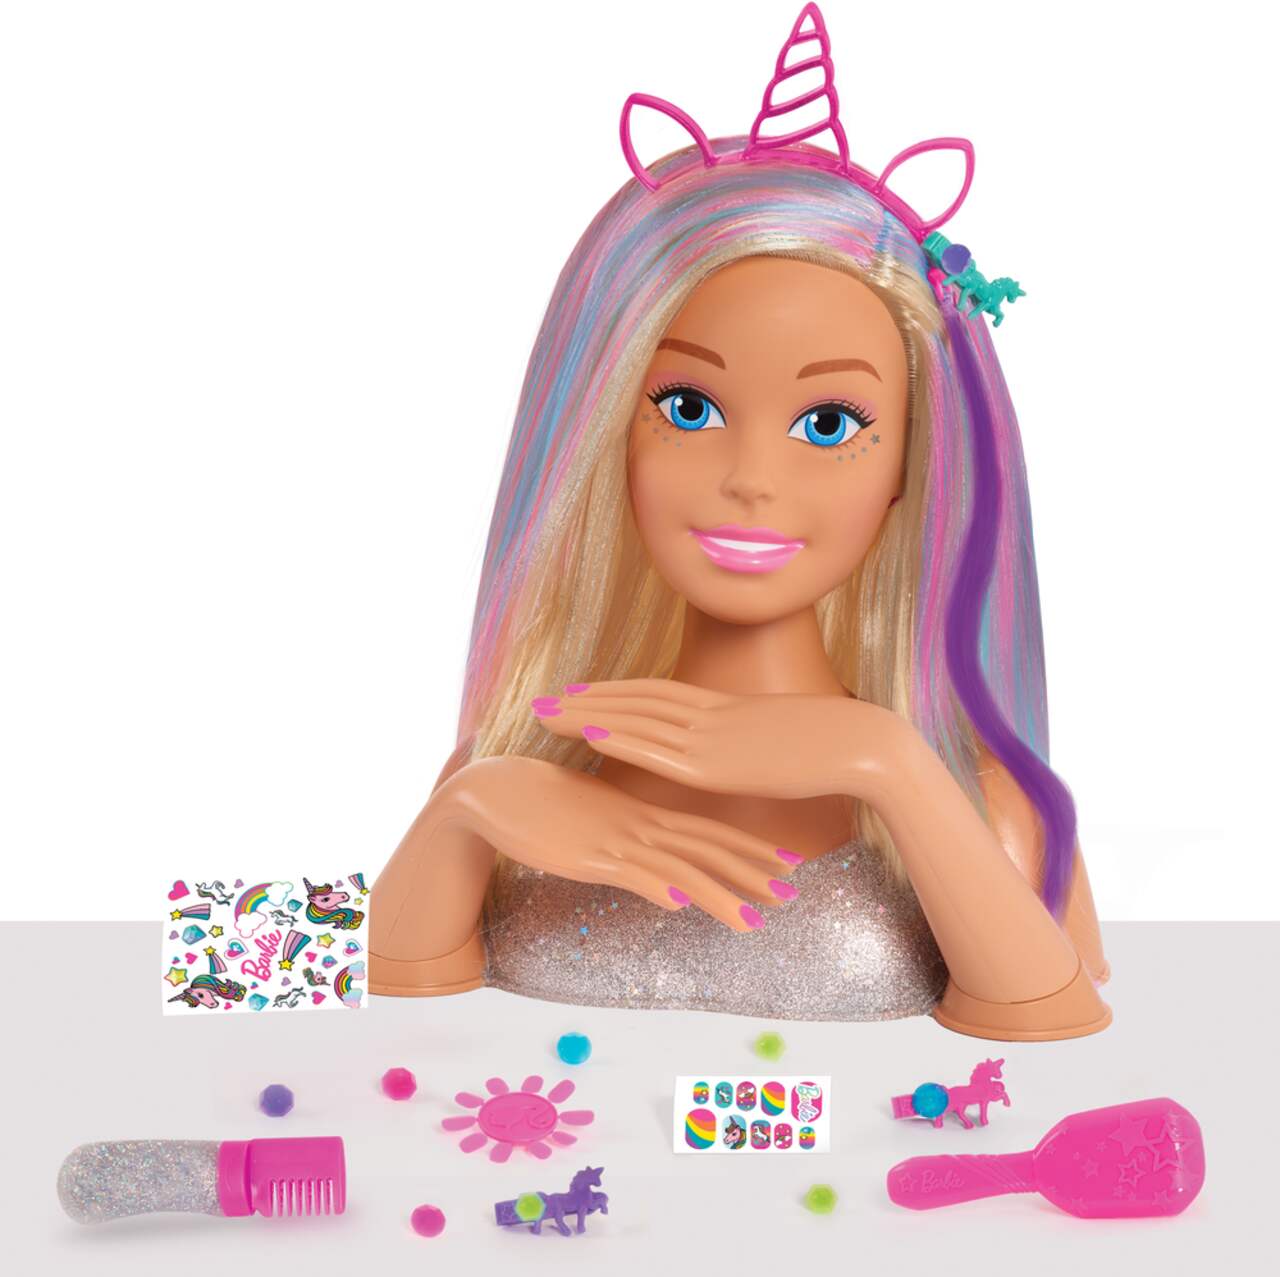 https://media-www.canadiantire.ca/product/seasonal-gardening/toys/toys-games/0501510/-barbie-colour-and-crimp-styling-head-02a576dd-5d77-413b-8f15-903a37579ec1.png?imdensity=1&imwidth=640&impolicy=mZoom